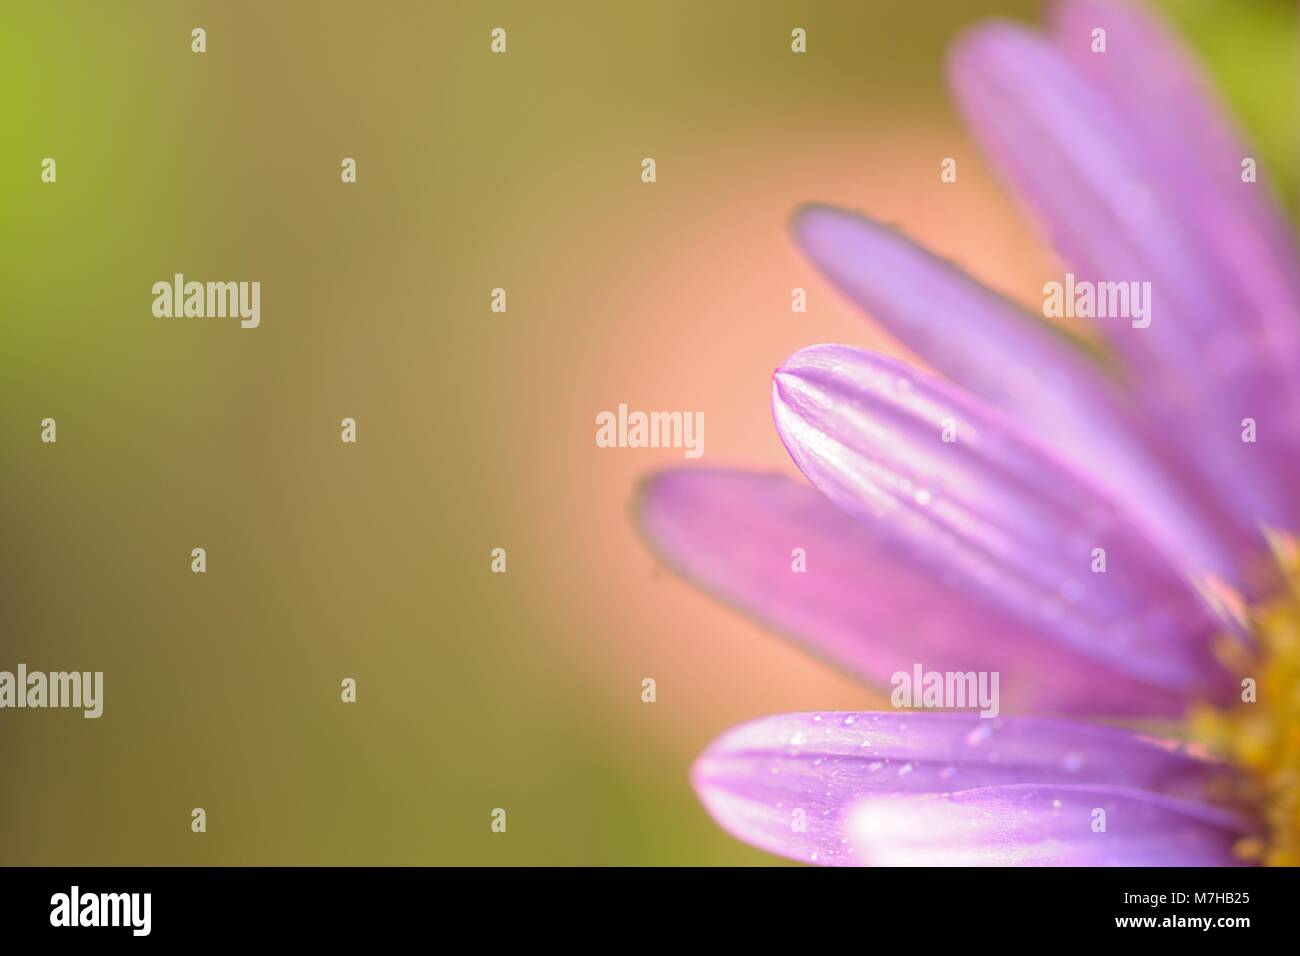 Macro texture of vibrant purple colored Daisy flower with rain droplets Stock Photo